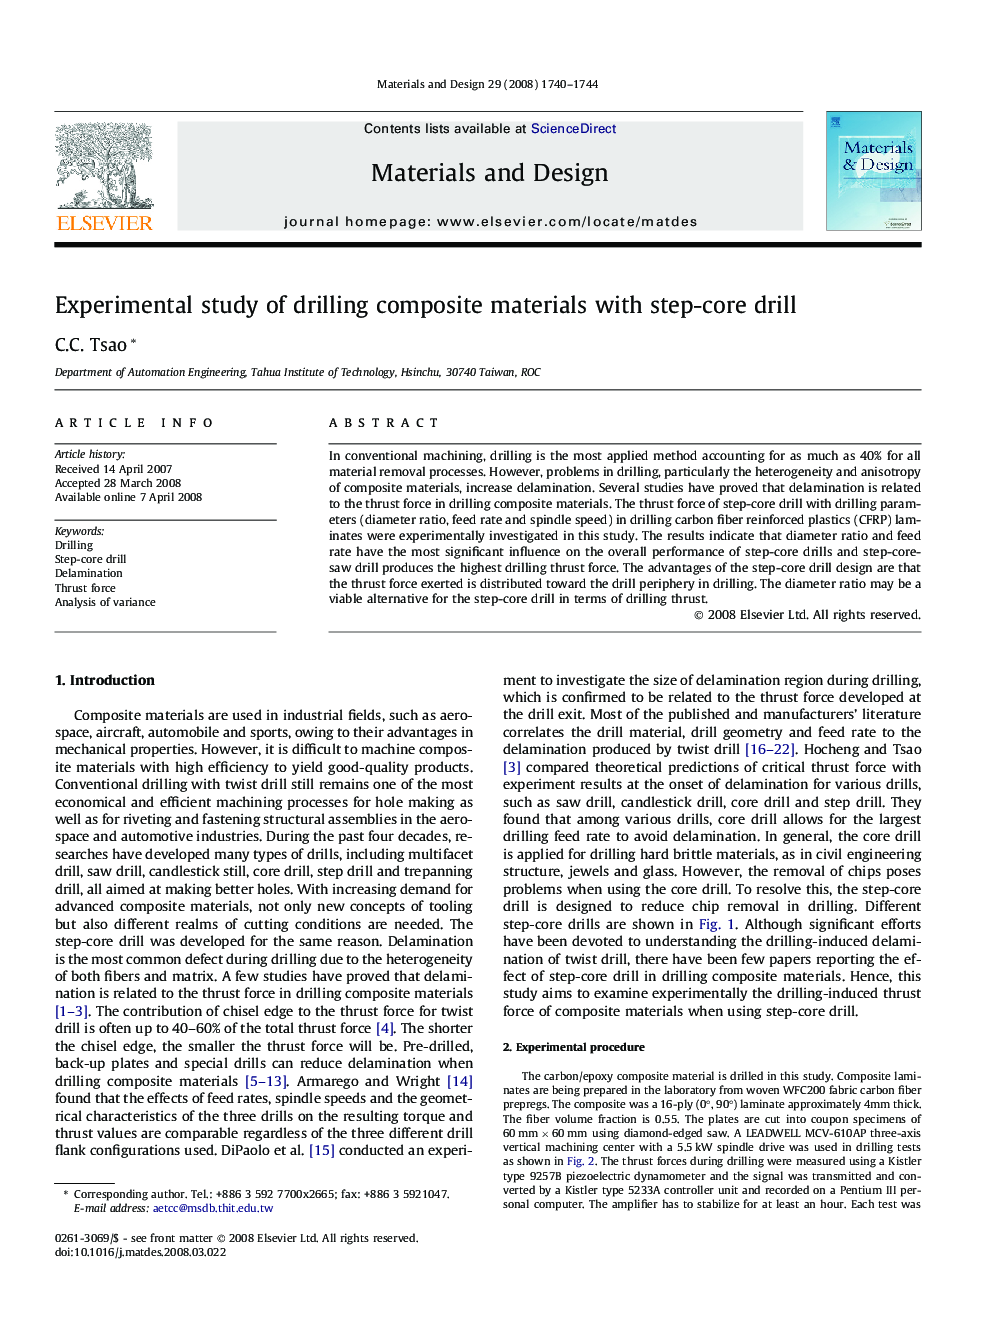 Experimental study of drilling composite materials with step-core drill